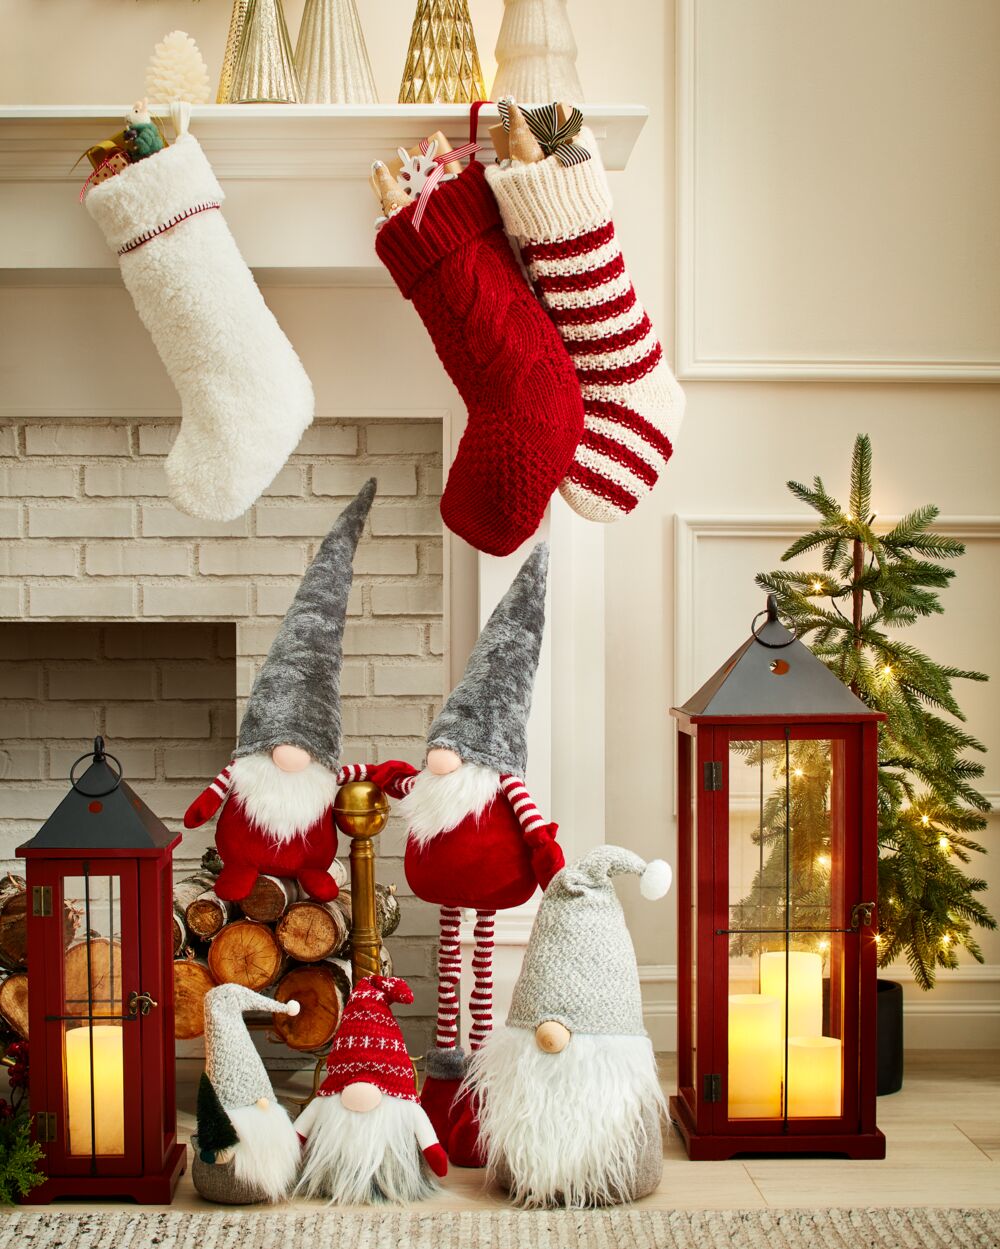 Holiday decorating ideas around the house